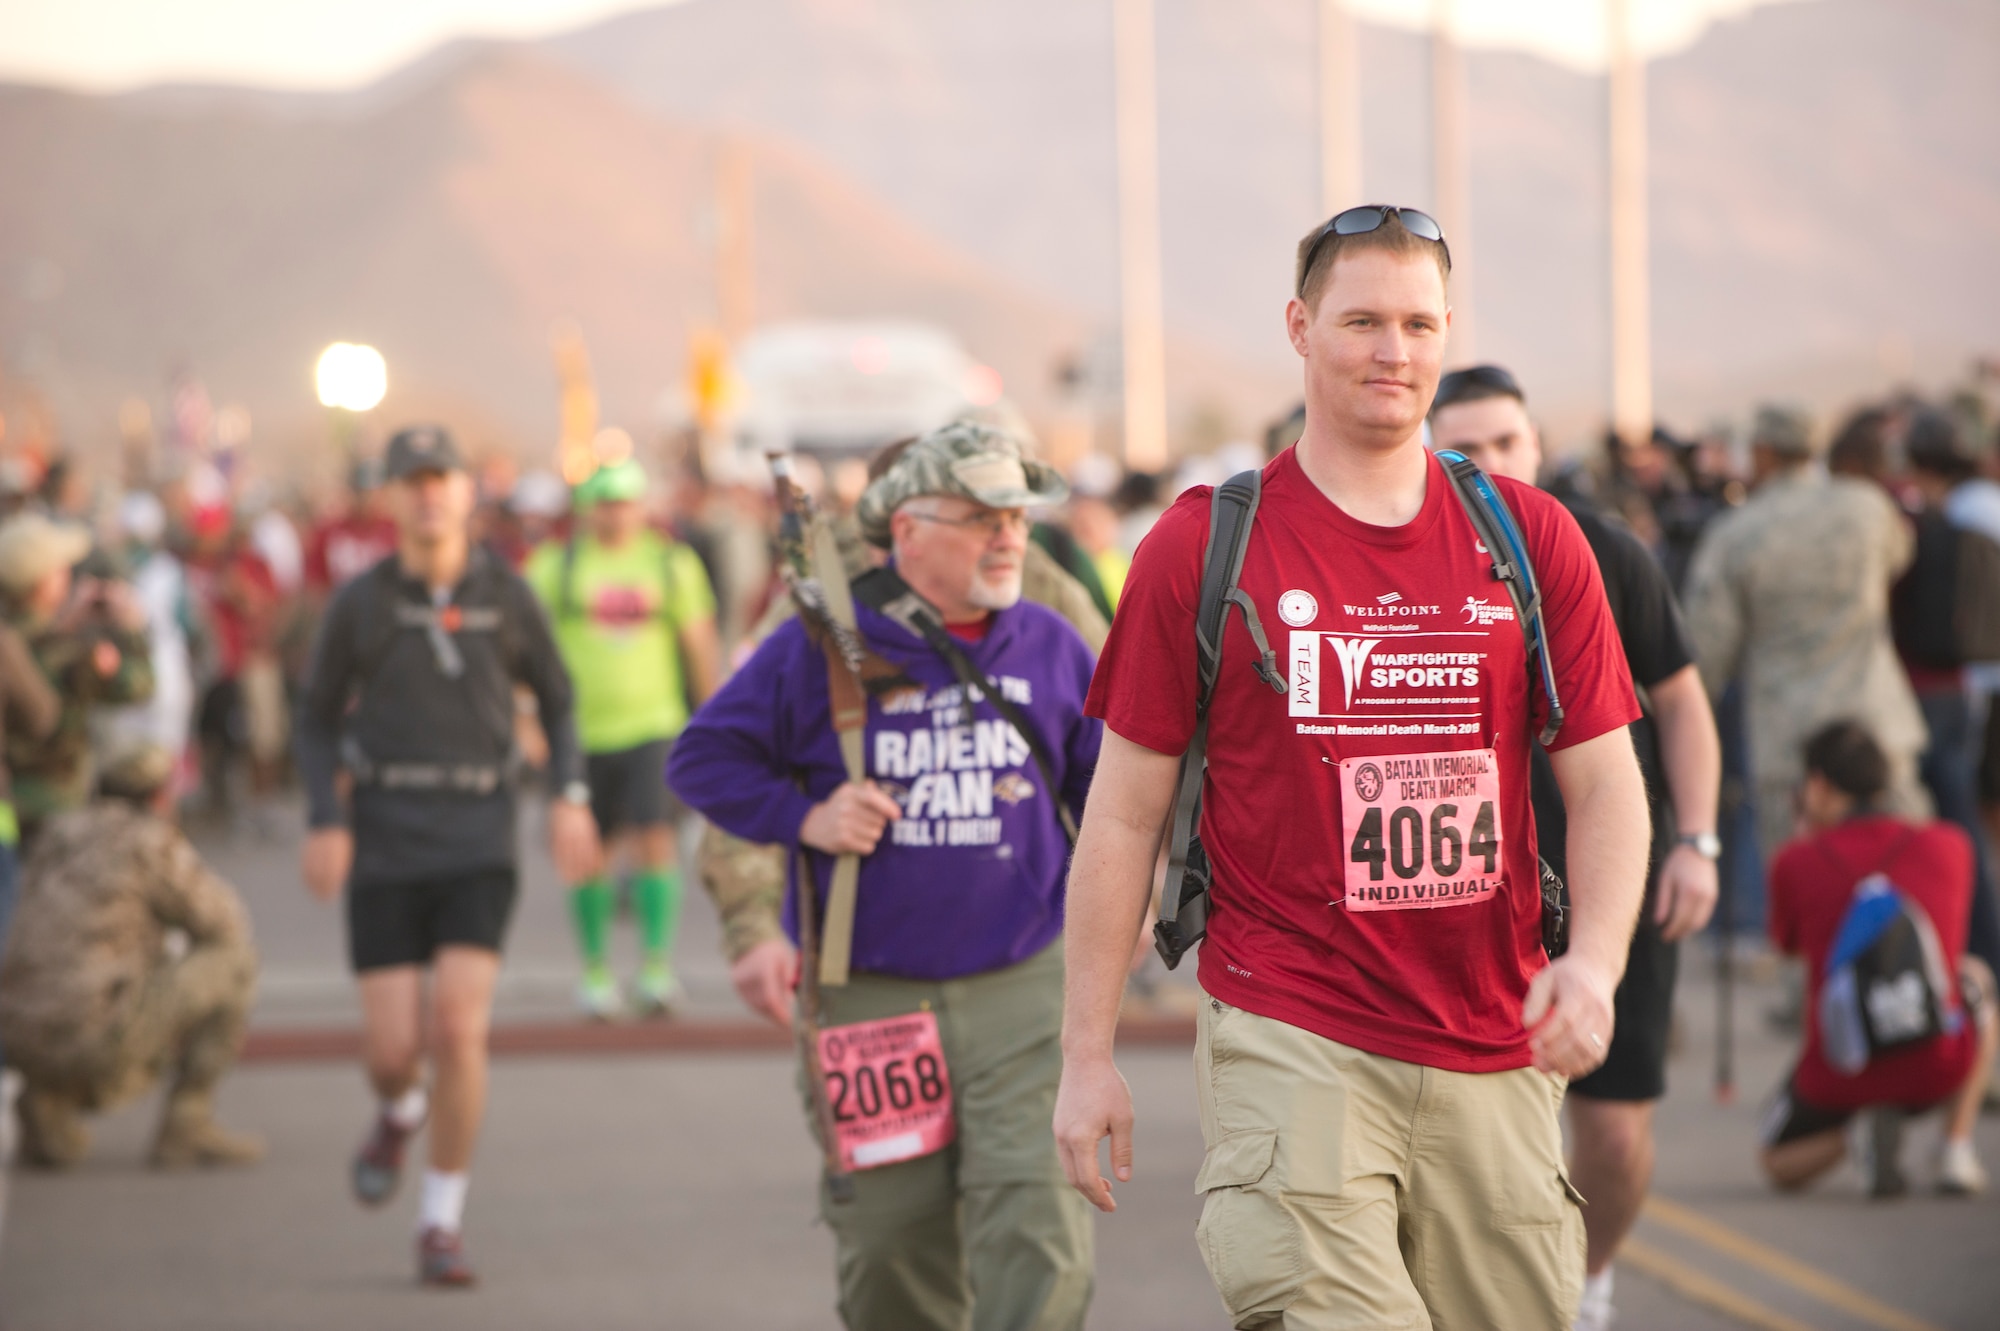 Participants in the Bataan Memorial Death March begin the marathon at White Sands Missile Range, N.M., March 17. The event included both a full 26.2-mile marathon and a 15.2-mile honorary march. More than 5,800 people from across the world participated in the 26.2-mile memorial march to honor the 76,000 prisoners of war who were forced to endure marching nearly 80 miles under brutal conditions during World War II. (U.S. Air Force Photo by Airman 1st Class Michael Shoemaker/Released)